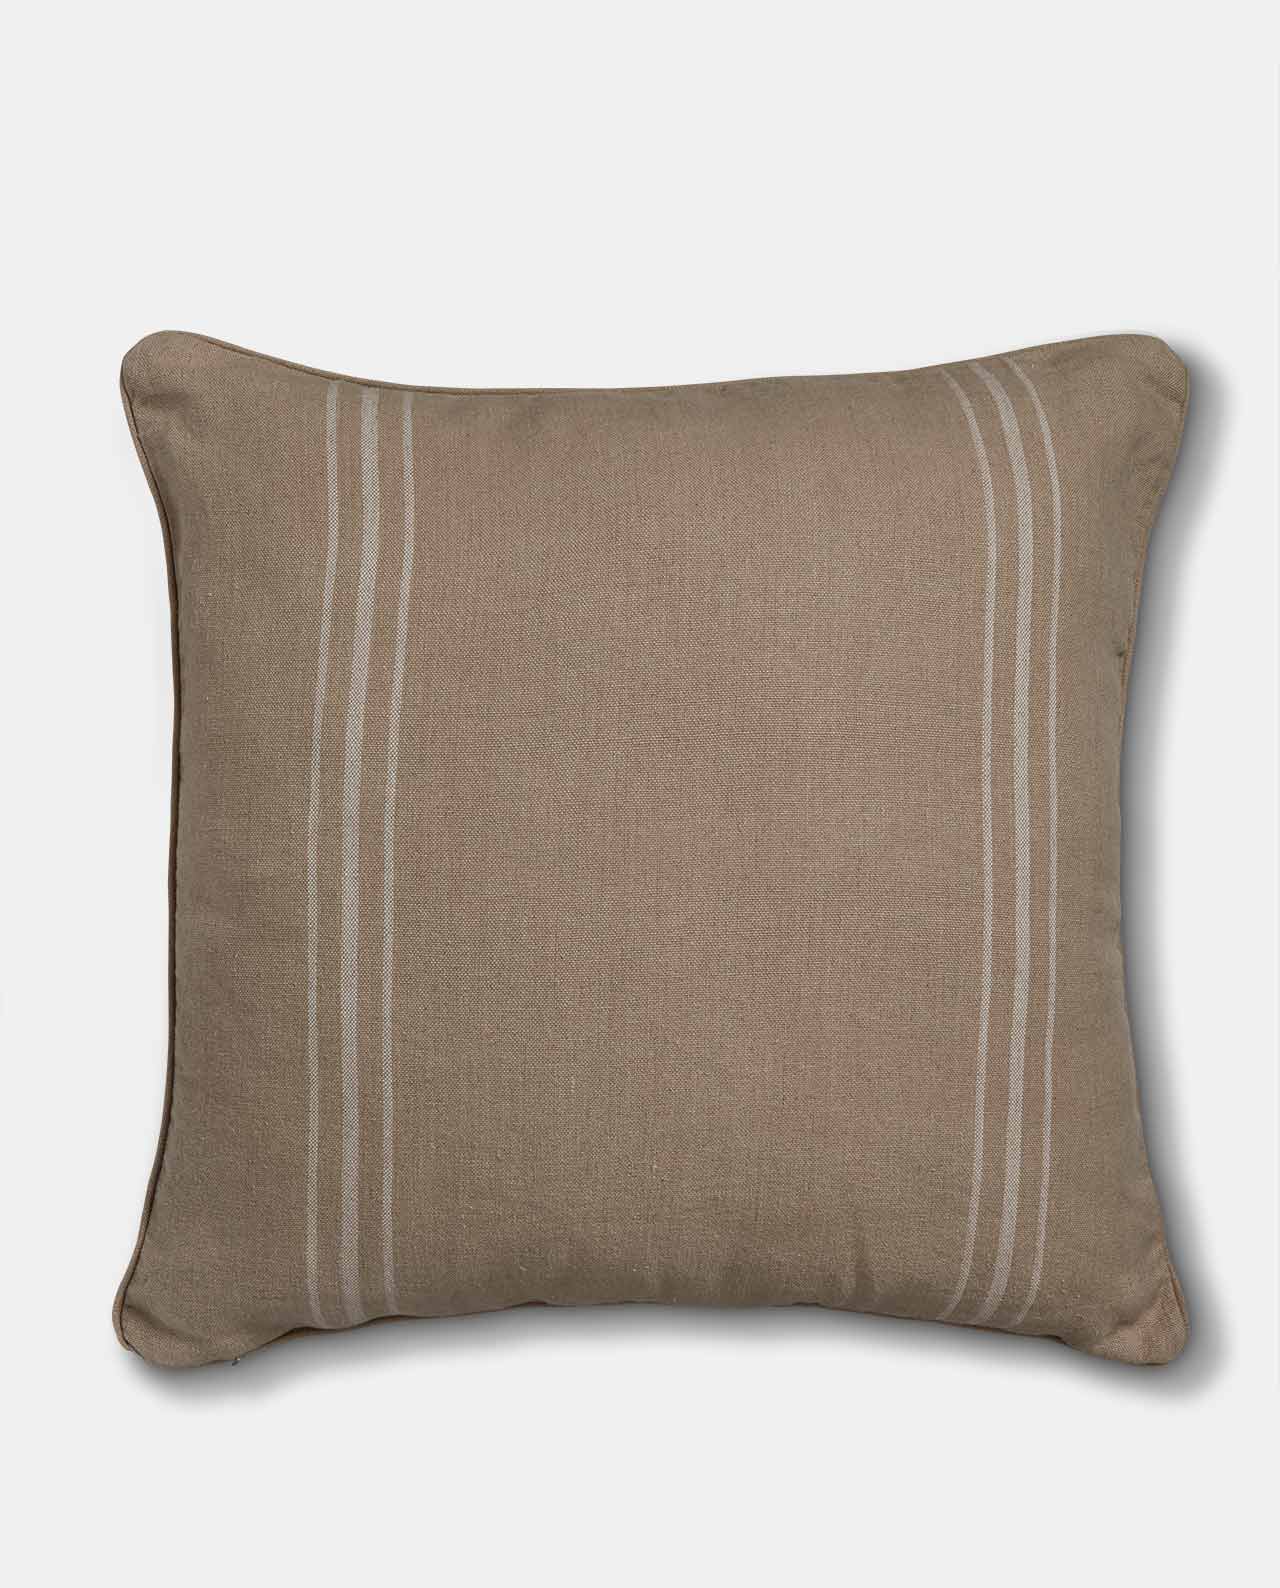 Natural Linen White Stripe Cushion for sale - Woodcock and Cavendish